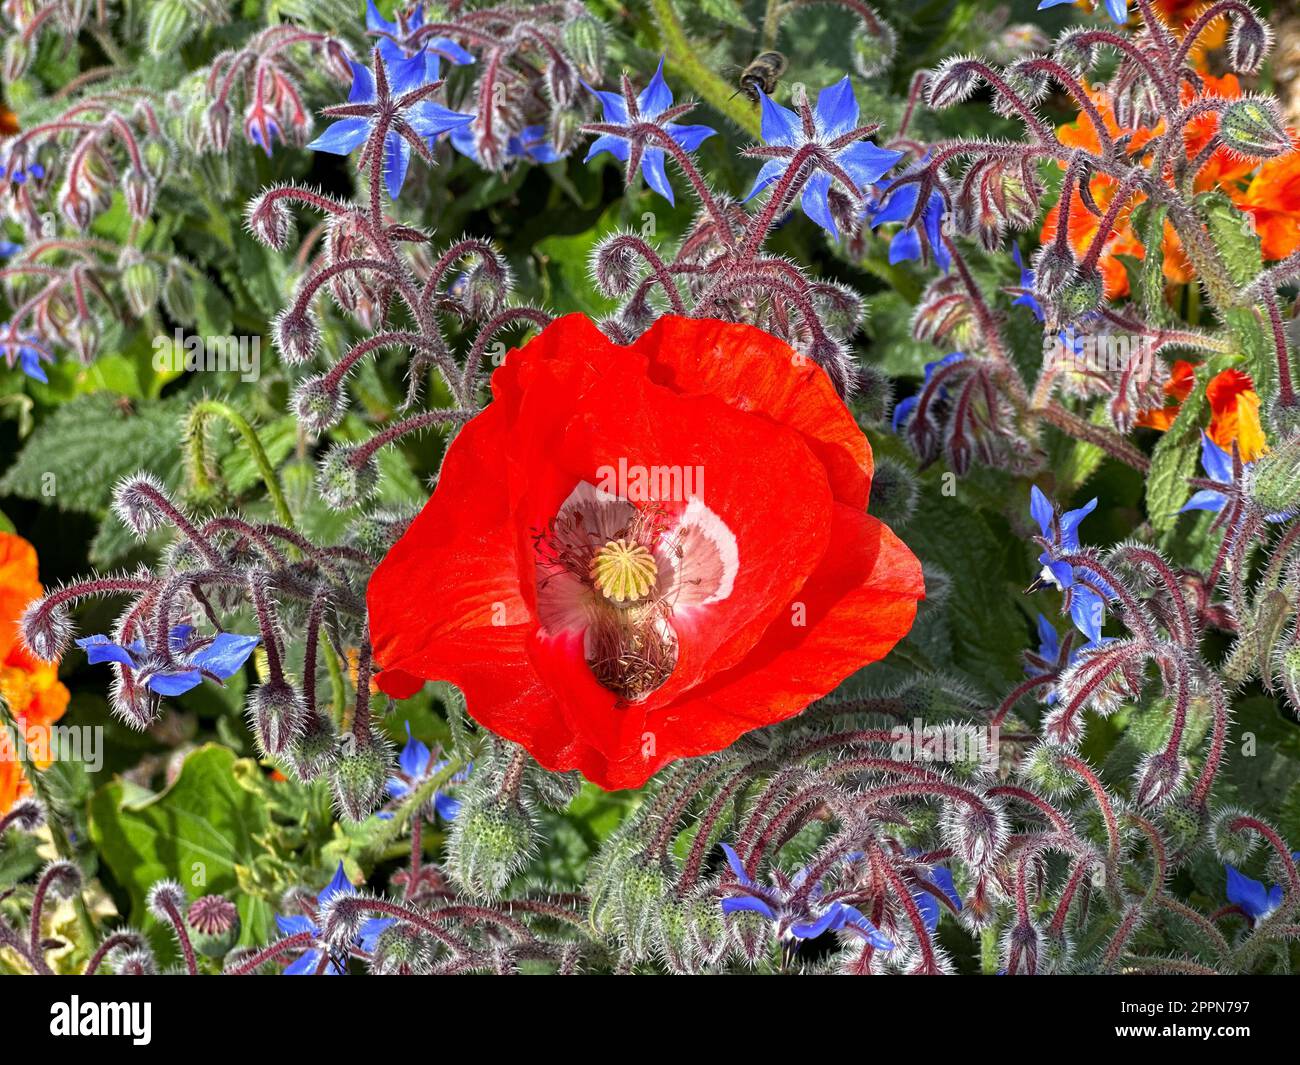 A vibrant photo of a red poppy and blue borage plants in a garden. Stock Photo